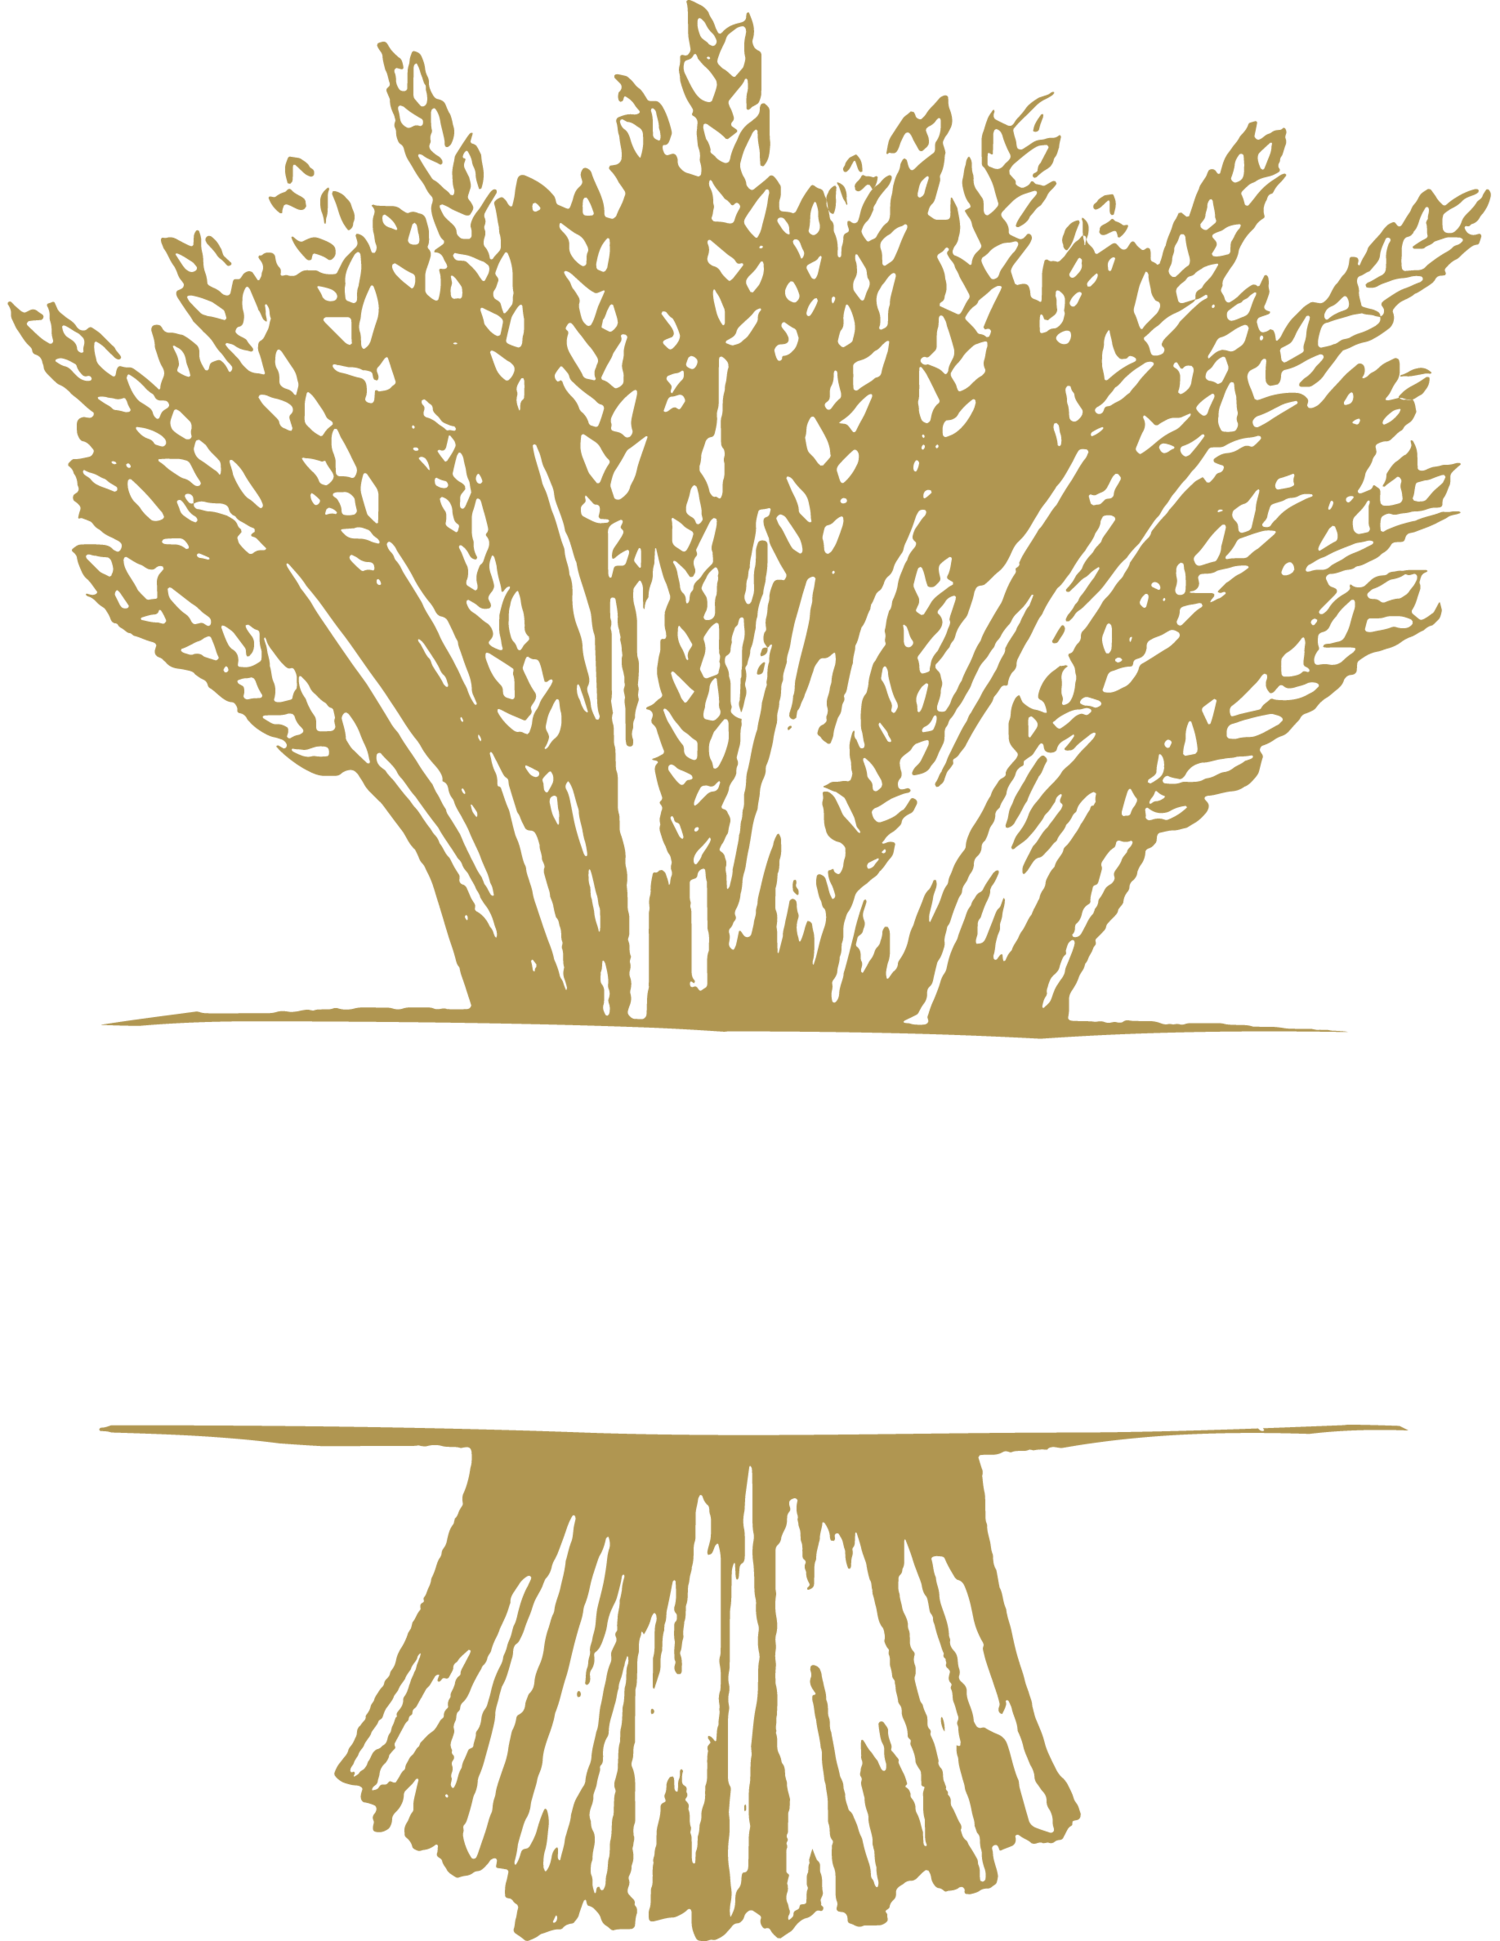 The Grain Shed